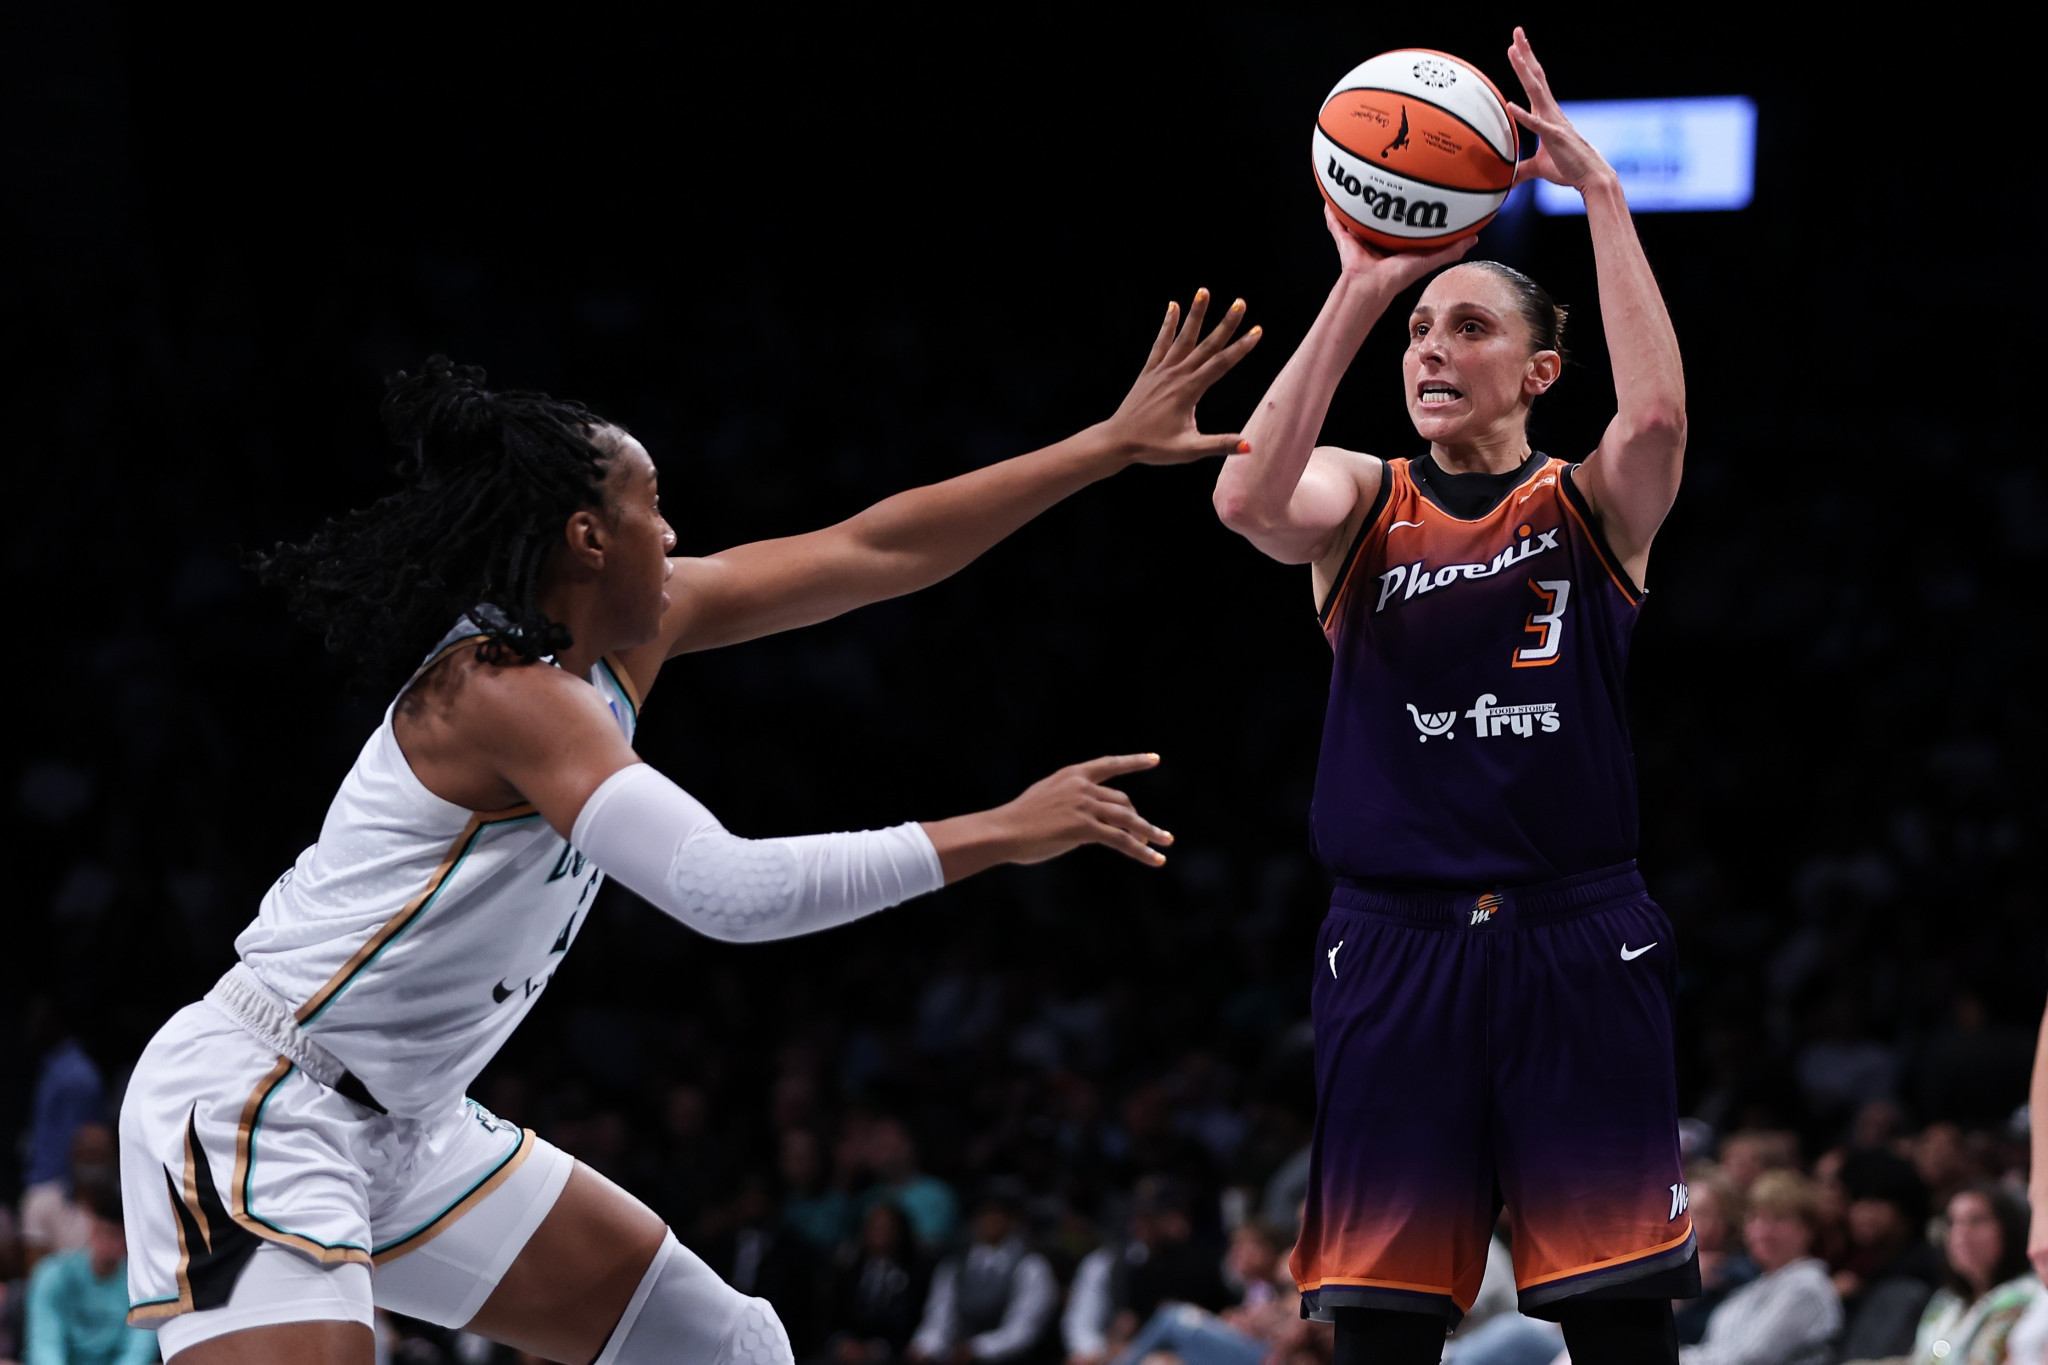 Diana Taurasi, right, is seeking to win a sixth consecutive Olympic gold medal at Paris 2024 at the age of 42 ©Getty Images